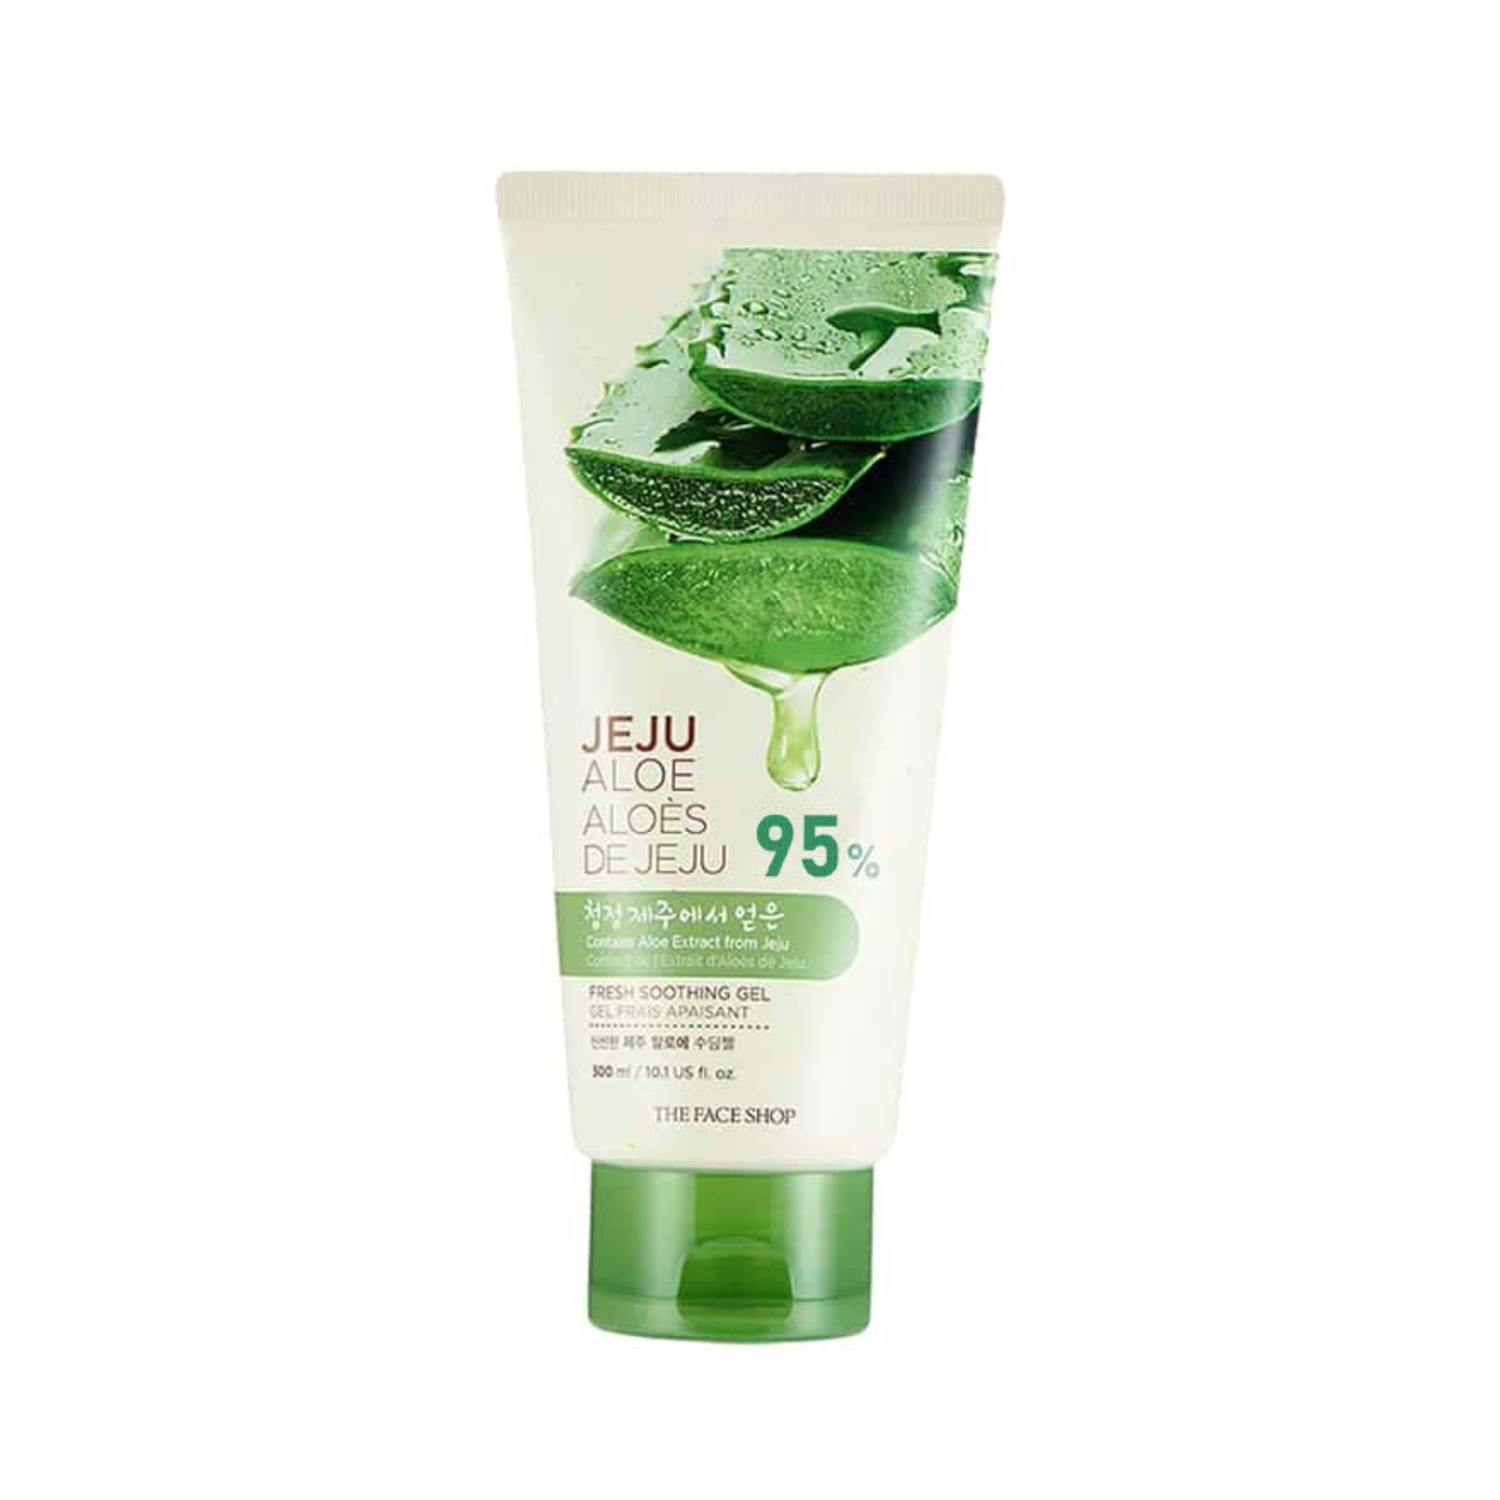 The Face Shop | The Face Shop Jeju Aloe 99% Fresh Soothing Gel (300ml)